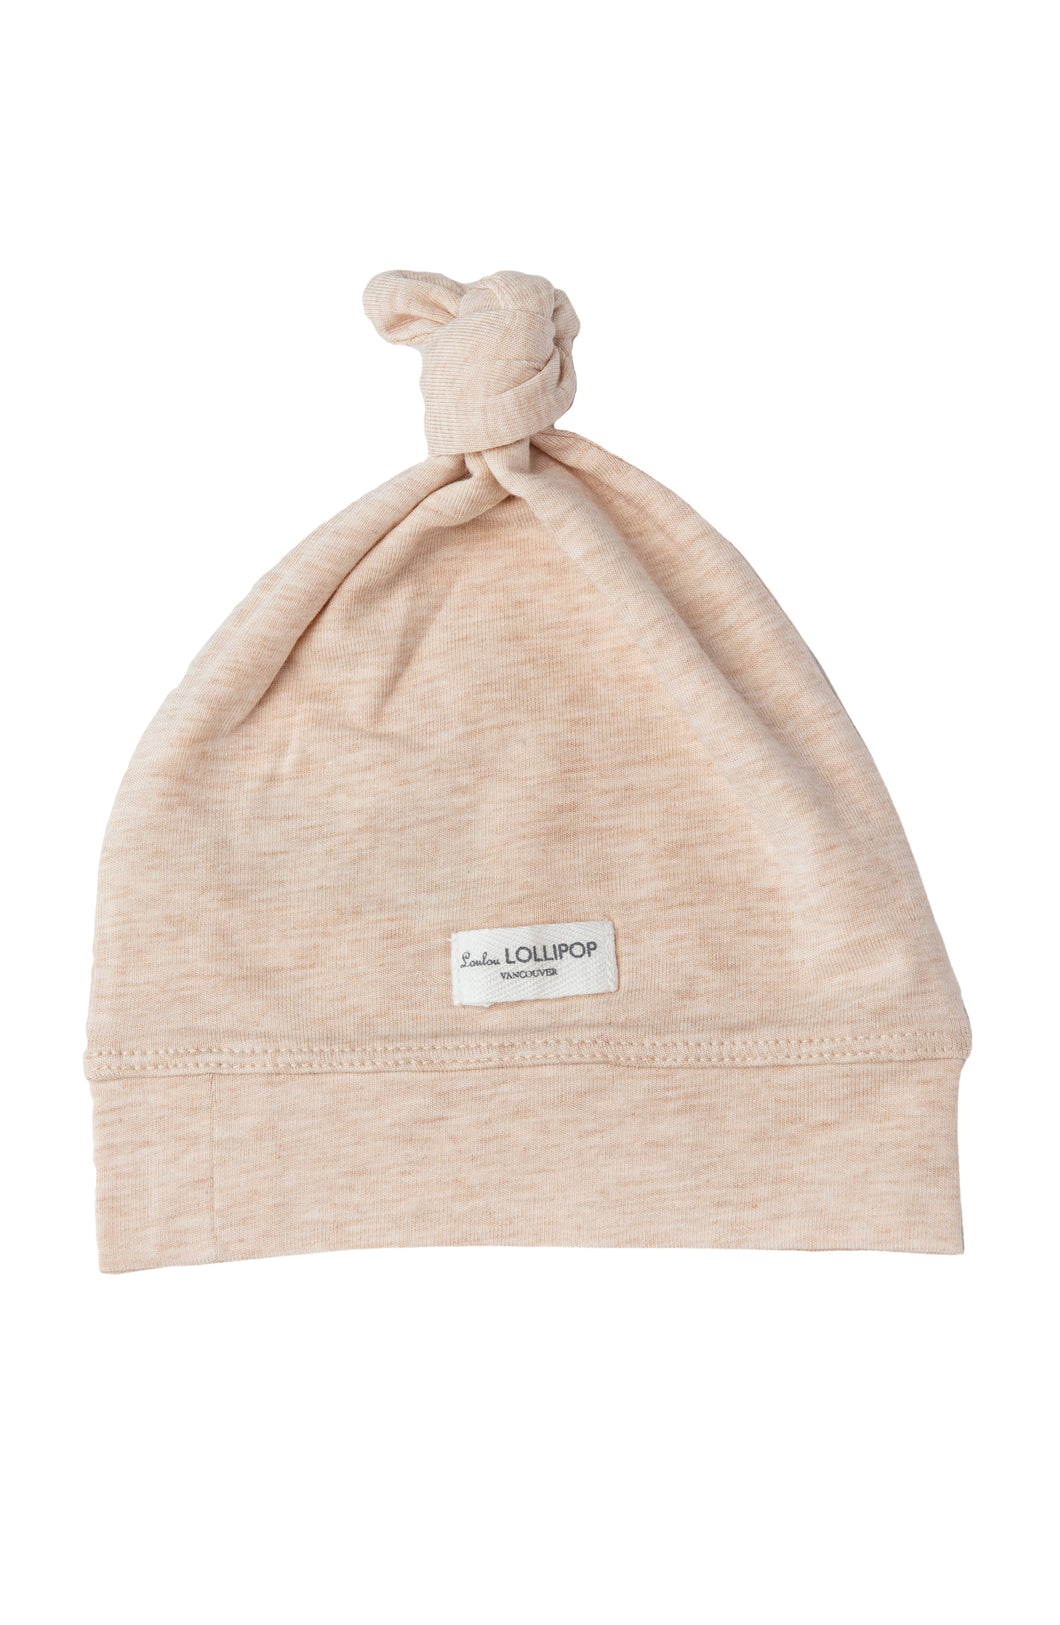 Top Knot Hat - Heather Oatmeal